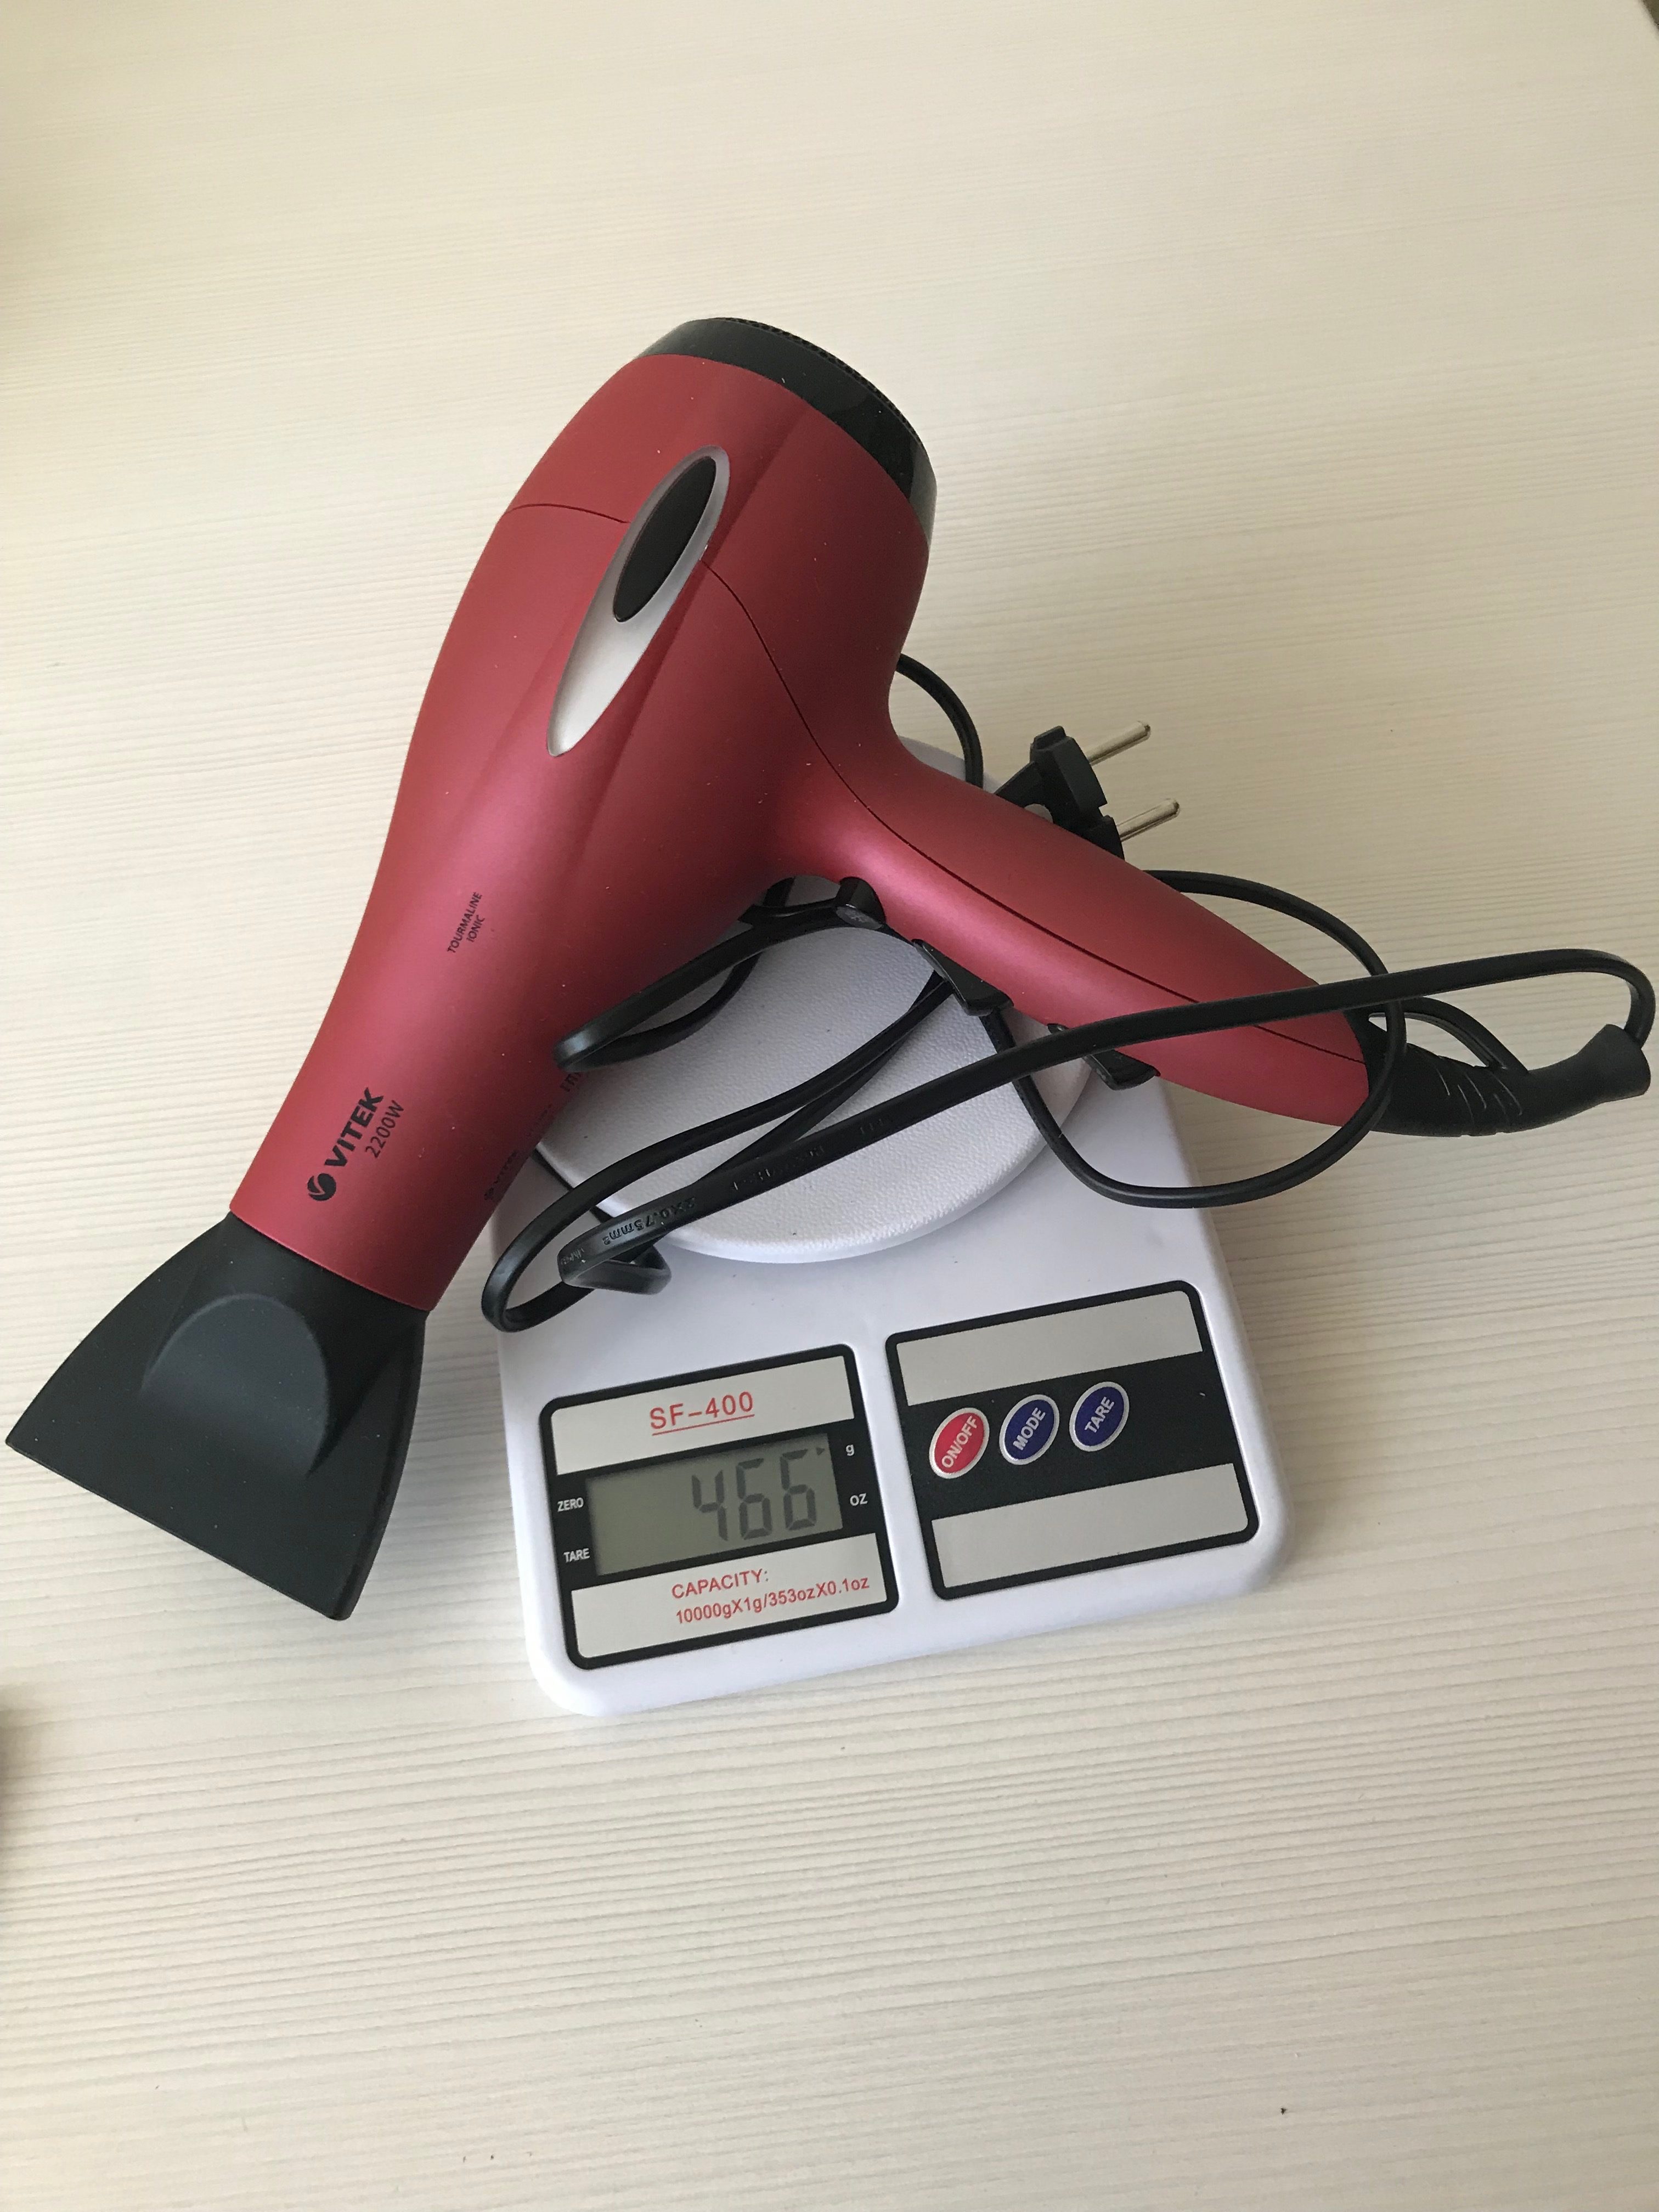 How much does a hair dryer weigh?